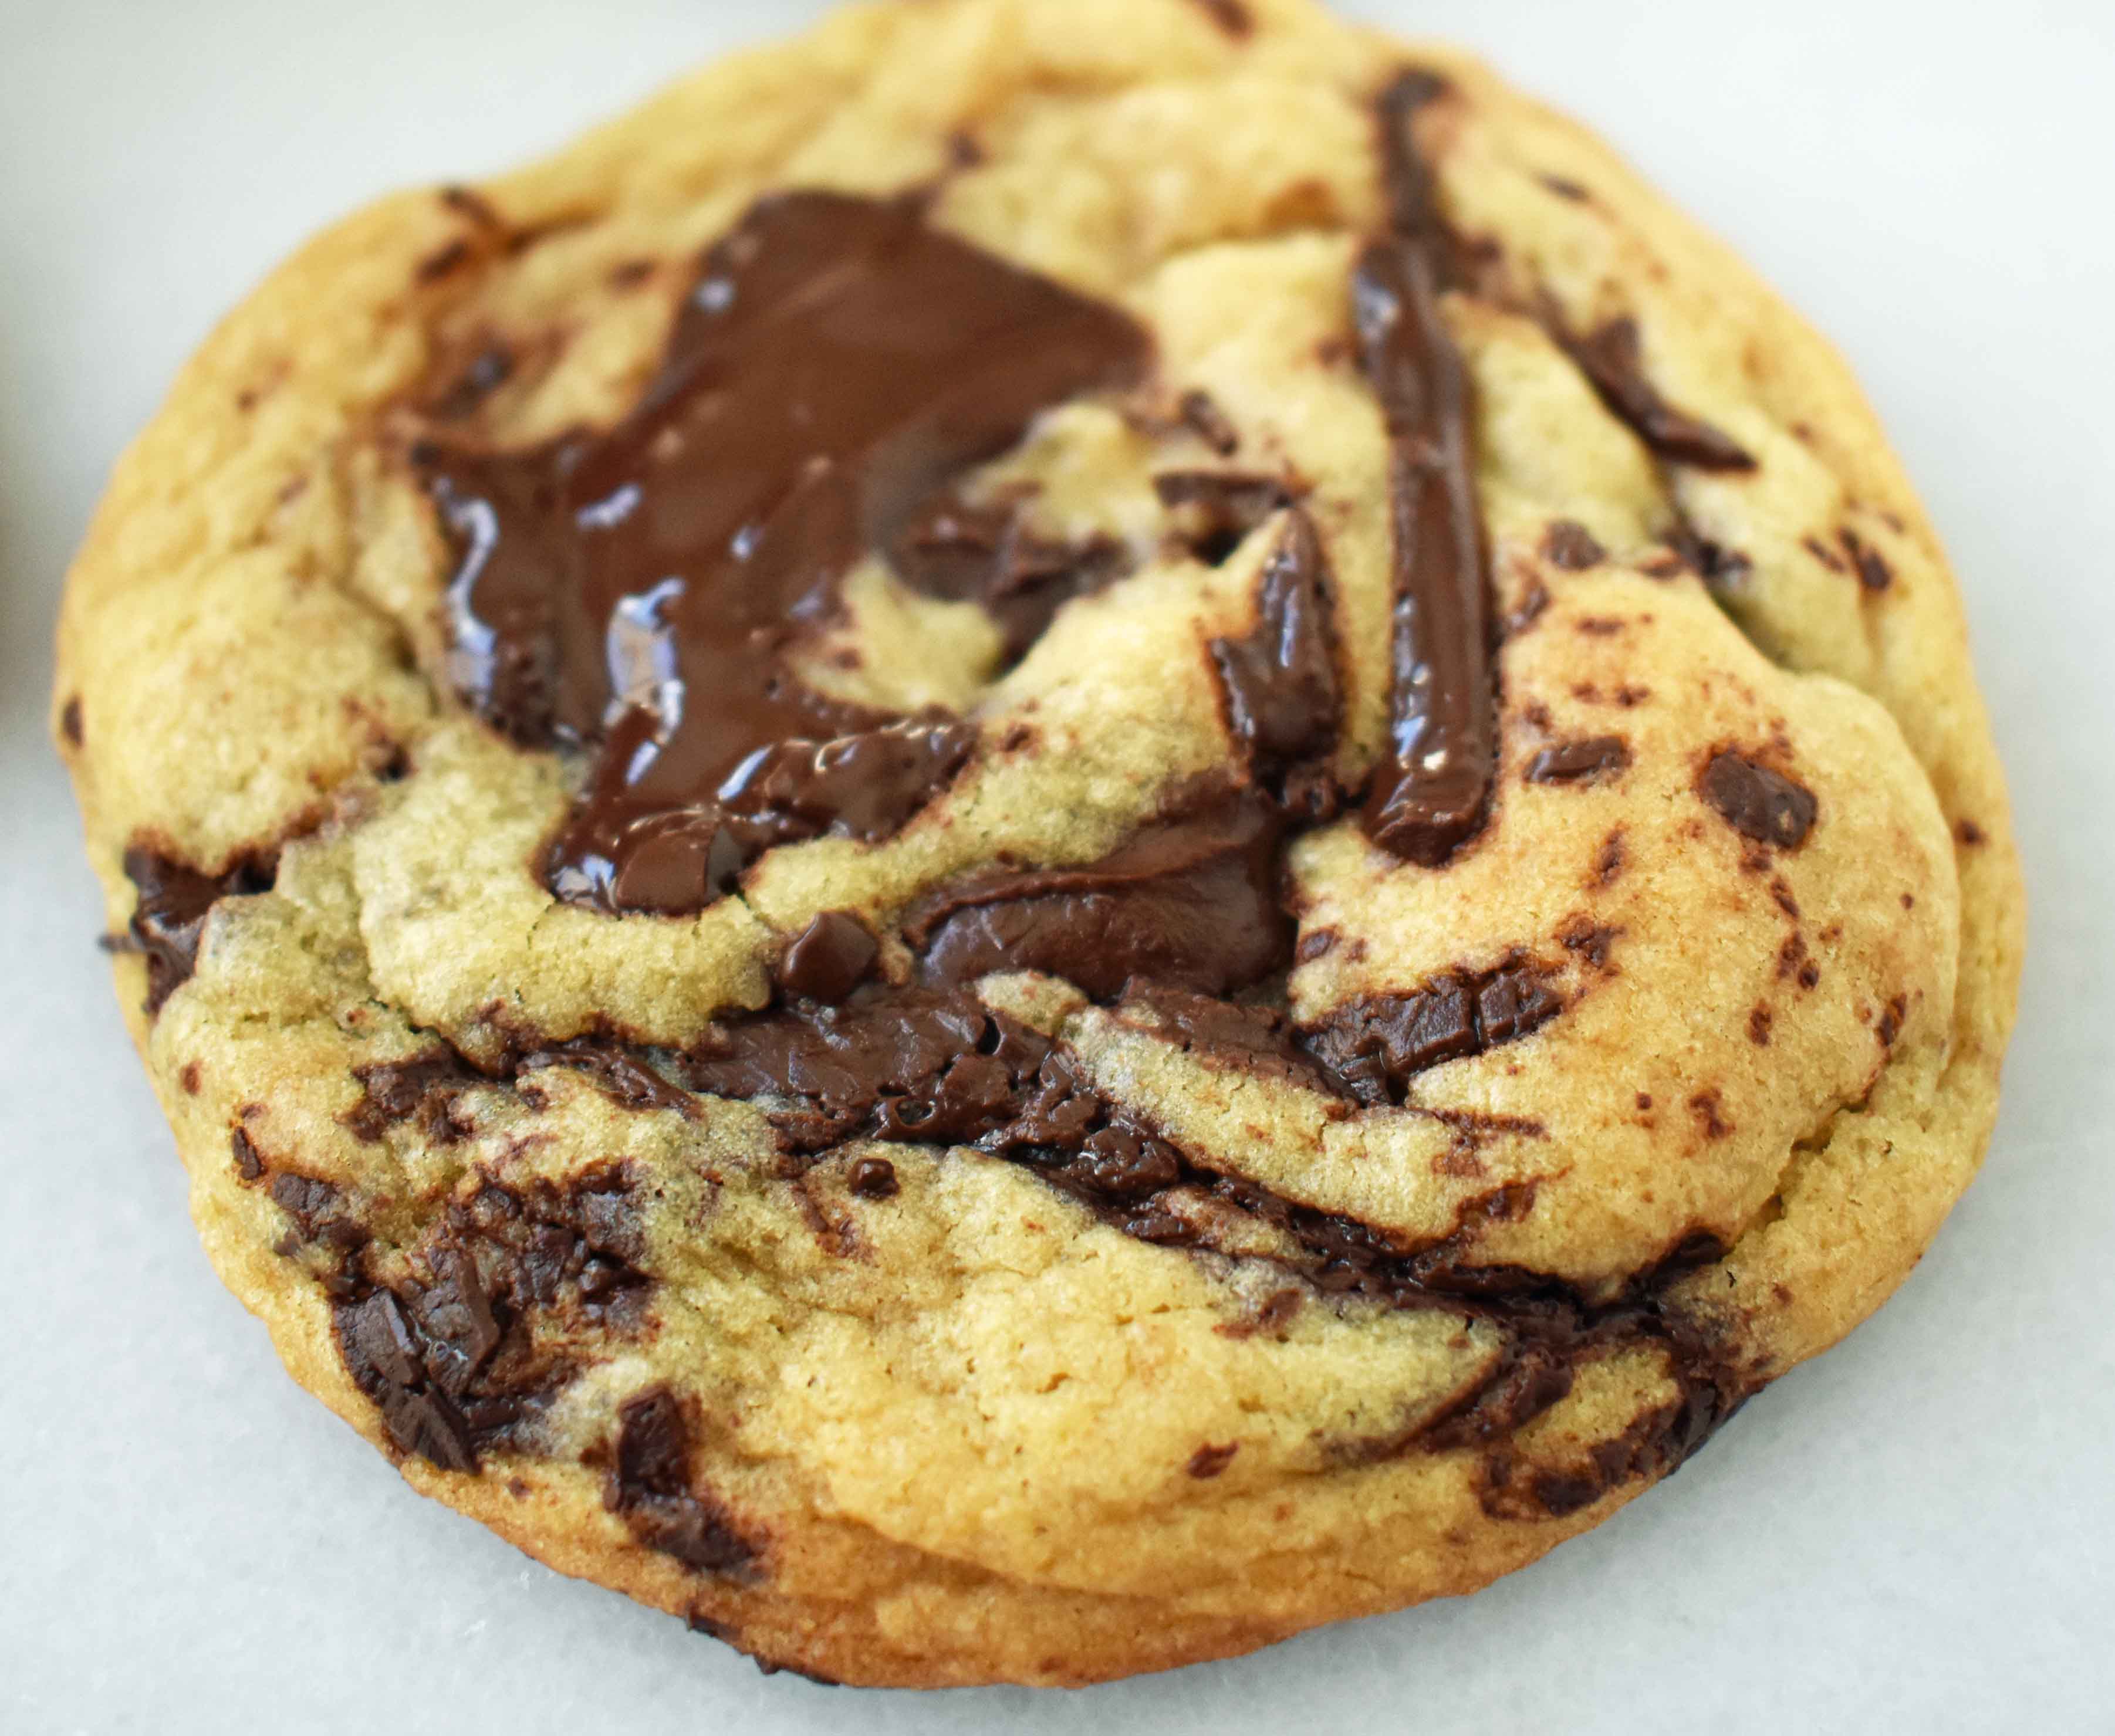 Ultimate Chocolate Chip Cookies. The perfect chocolate chip cookie recipe every single time. www.modernhoney.com